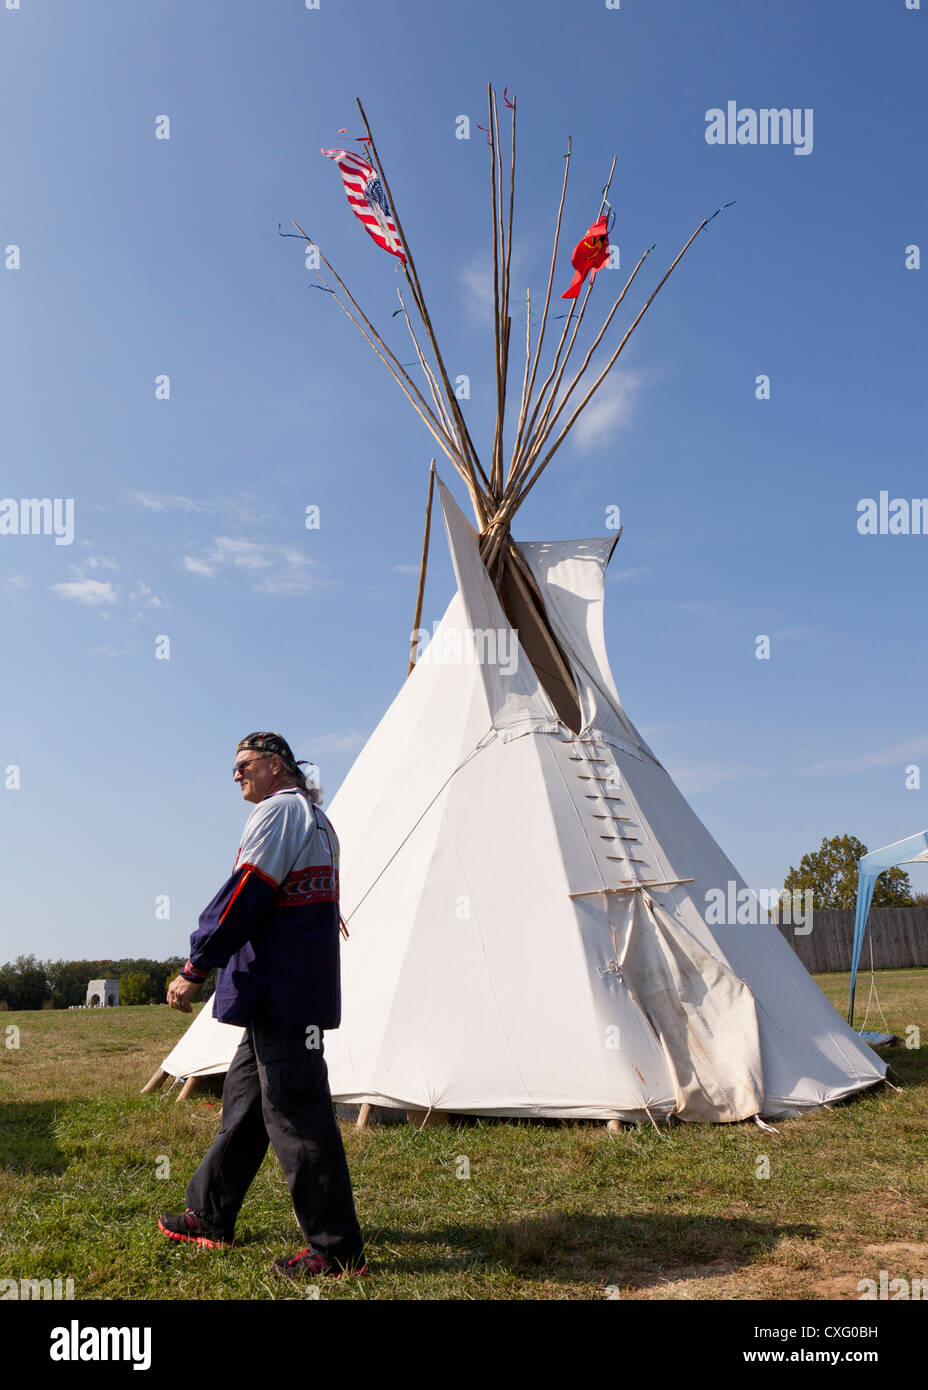 A man walking by a tepee Stock Photo